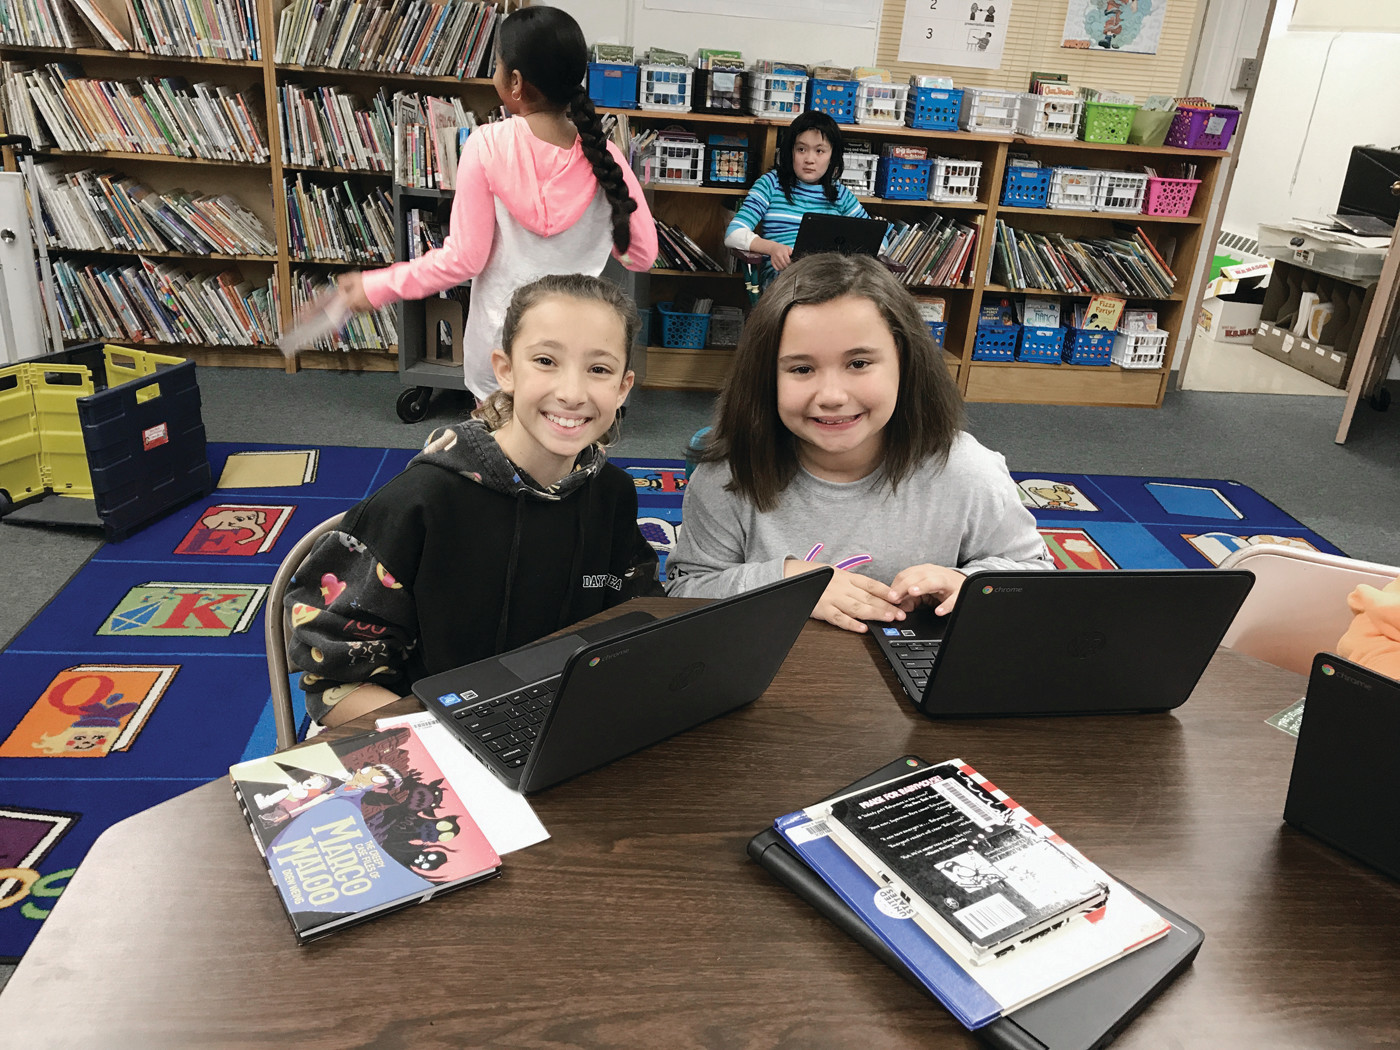 BEAMING FROM DEVICE TO DEVICE: Dutemple Elementary students show their coding prowess during library period.